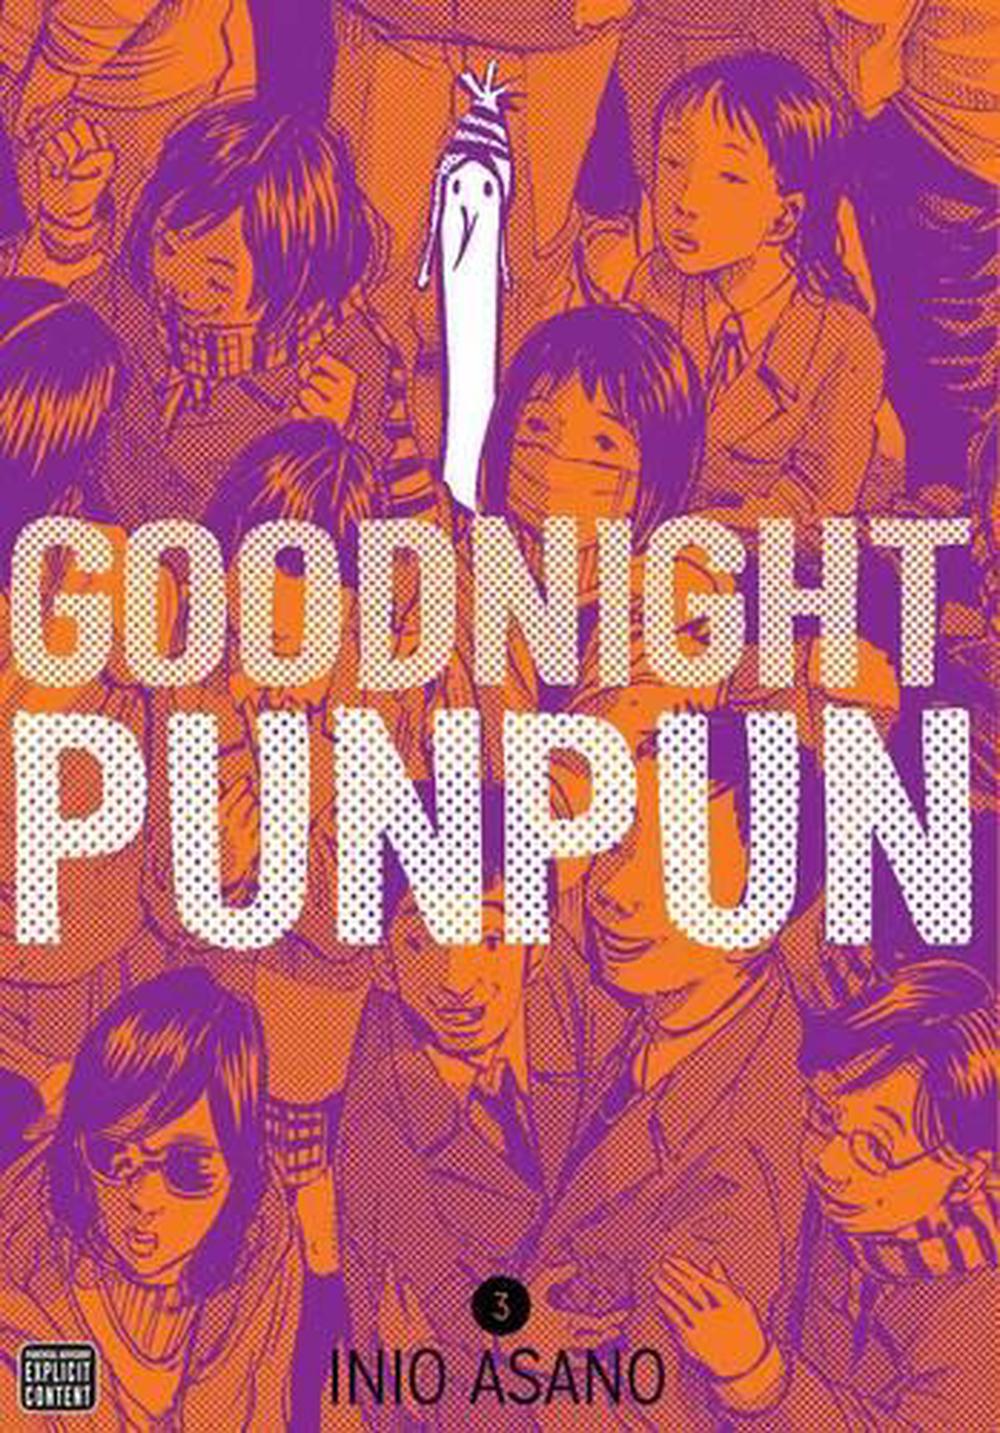 by　Vol.　Inio　Goodnight　Paperback,　9781421586229　Asano,　online　Punpun,　The　Nile　Buy　at